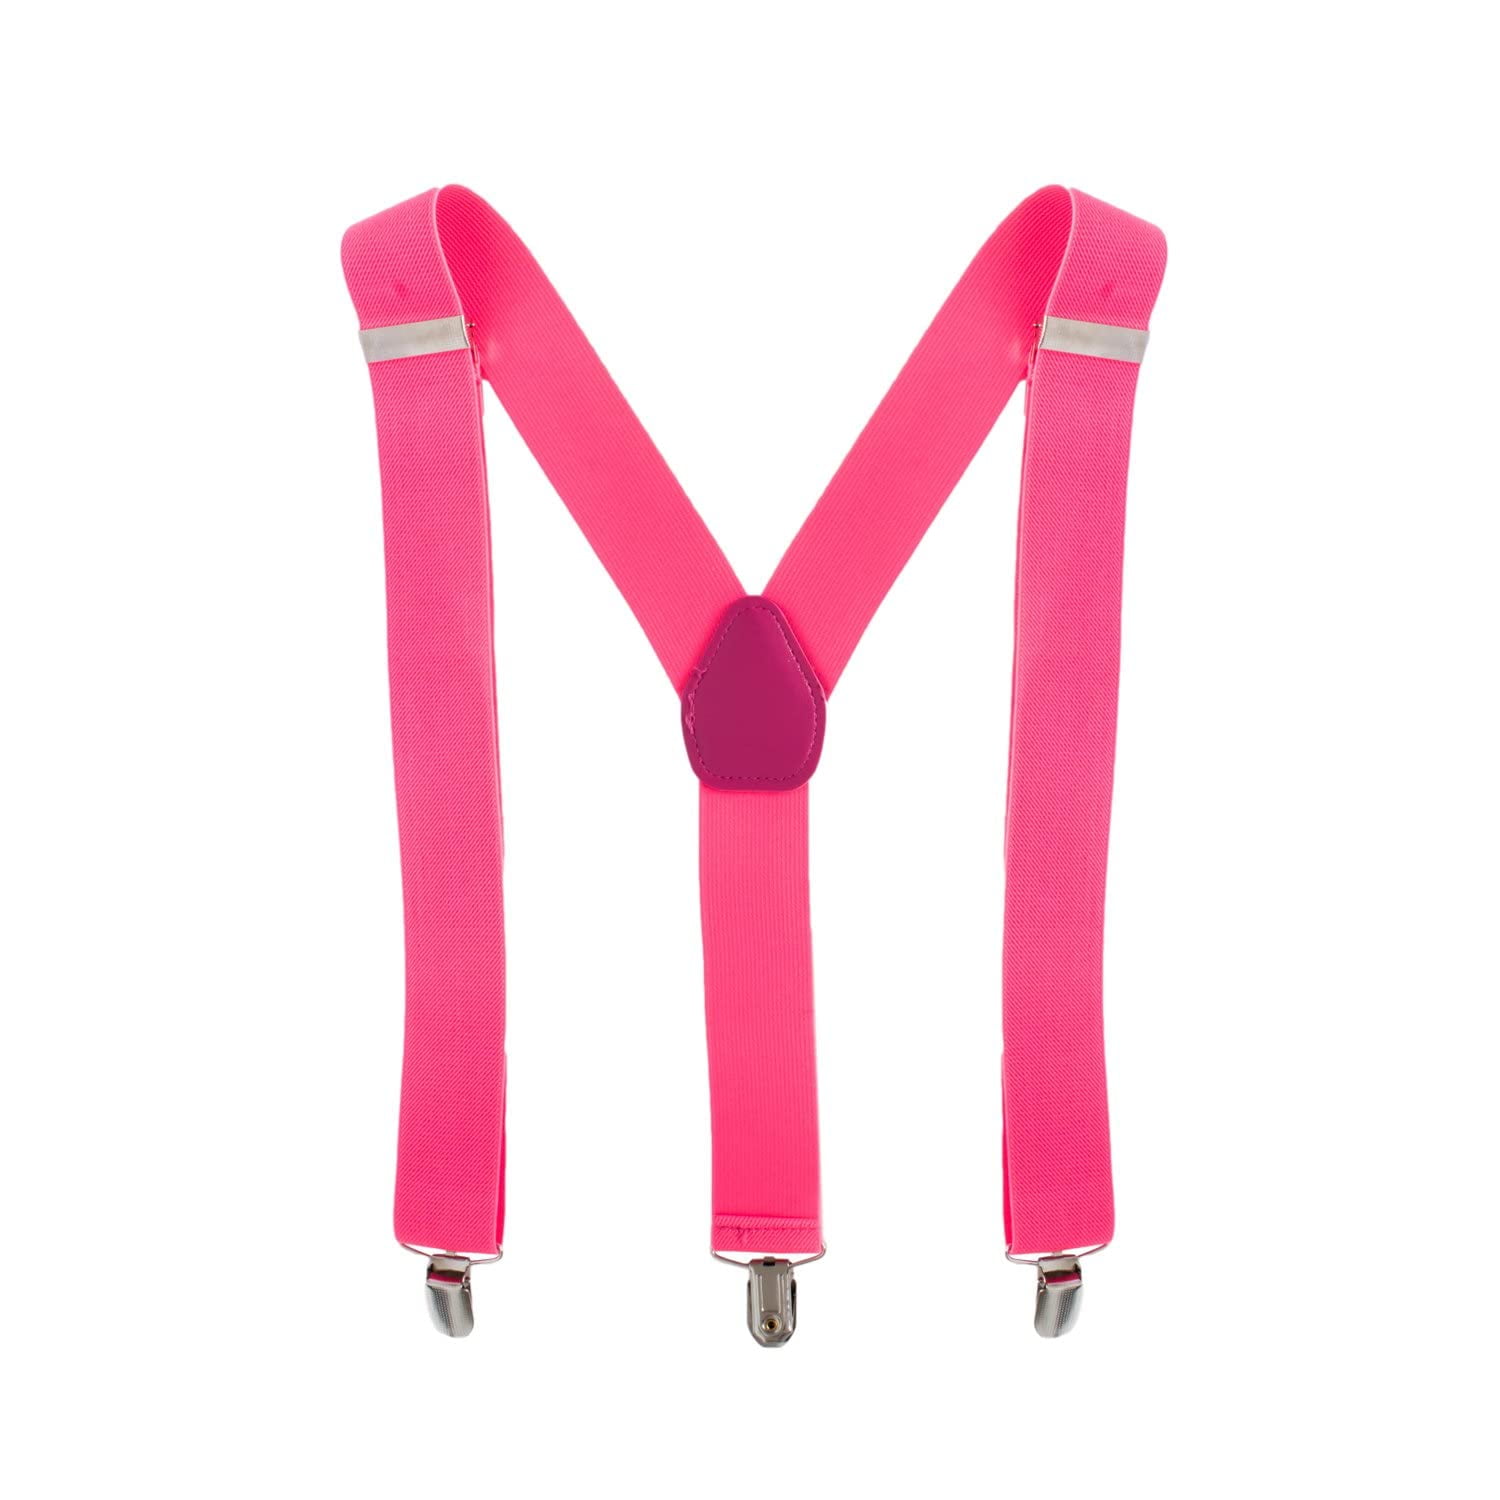 PSF353 Suspender Clips at